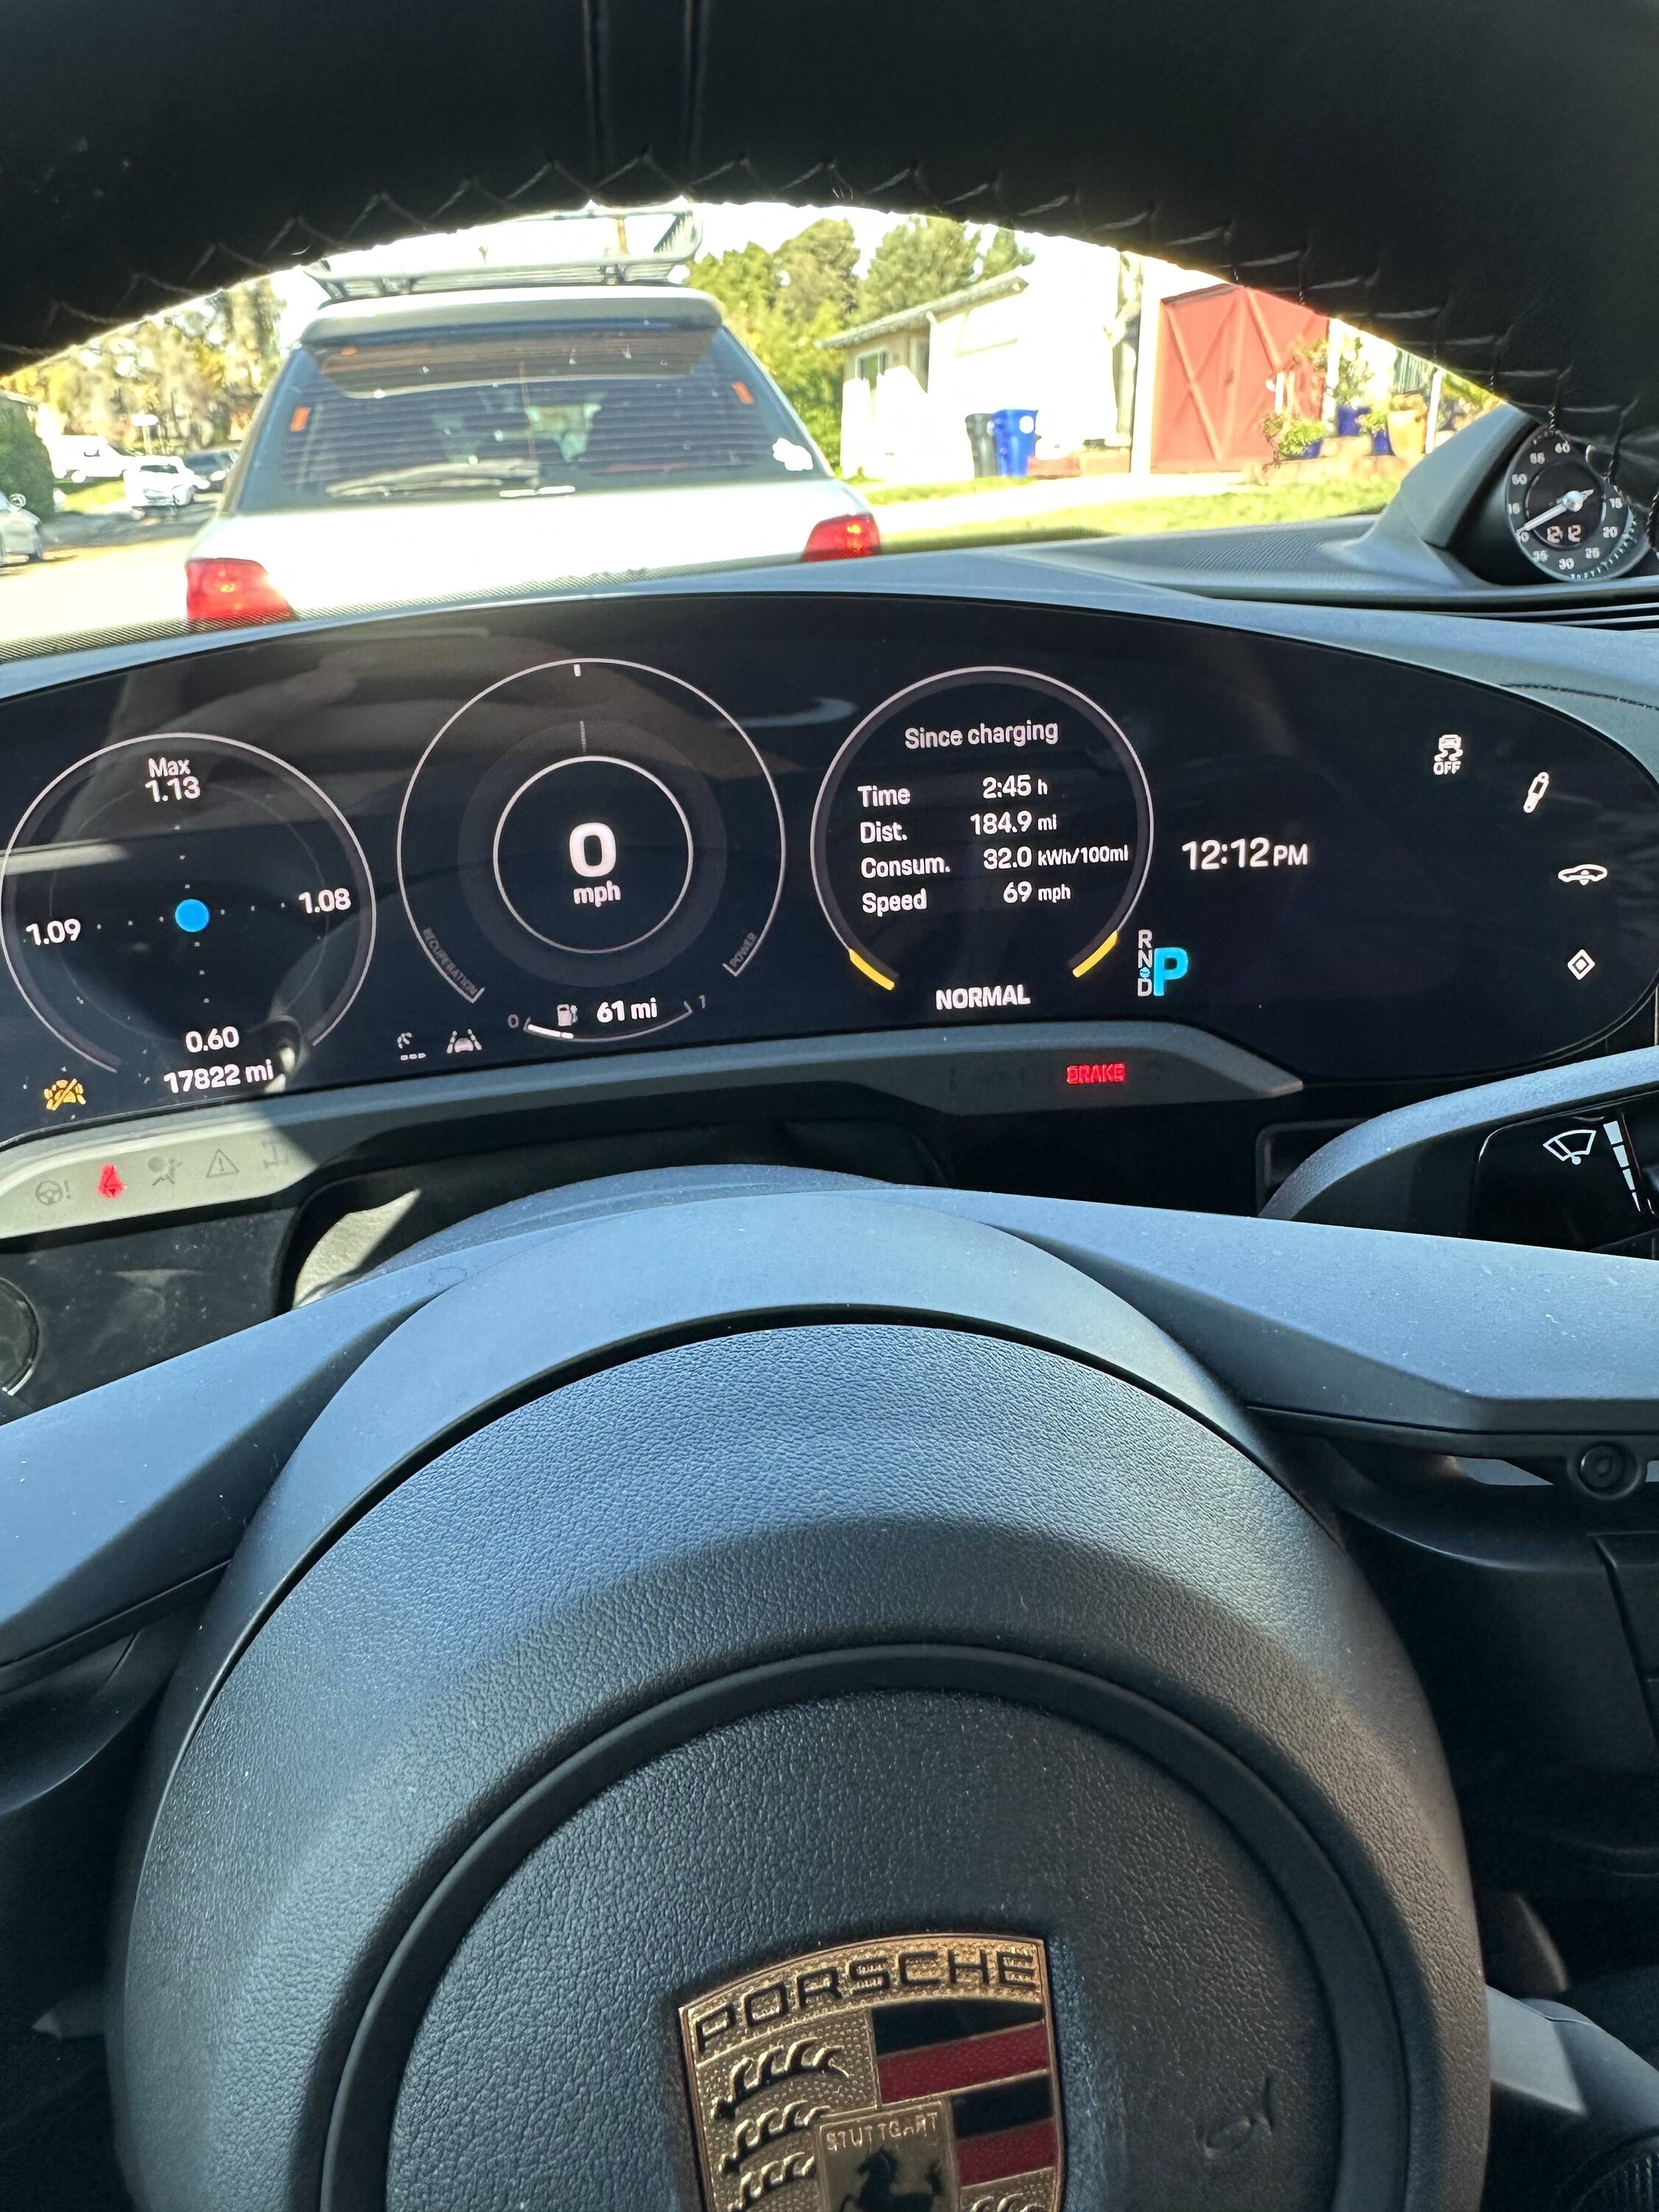 Porsche Taycan Lake Elsinore to San Francisco on One Charge (425.6 Miles) Kettleman to SF